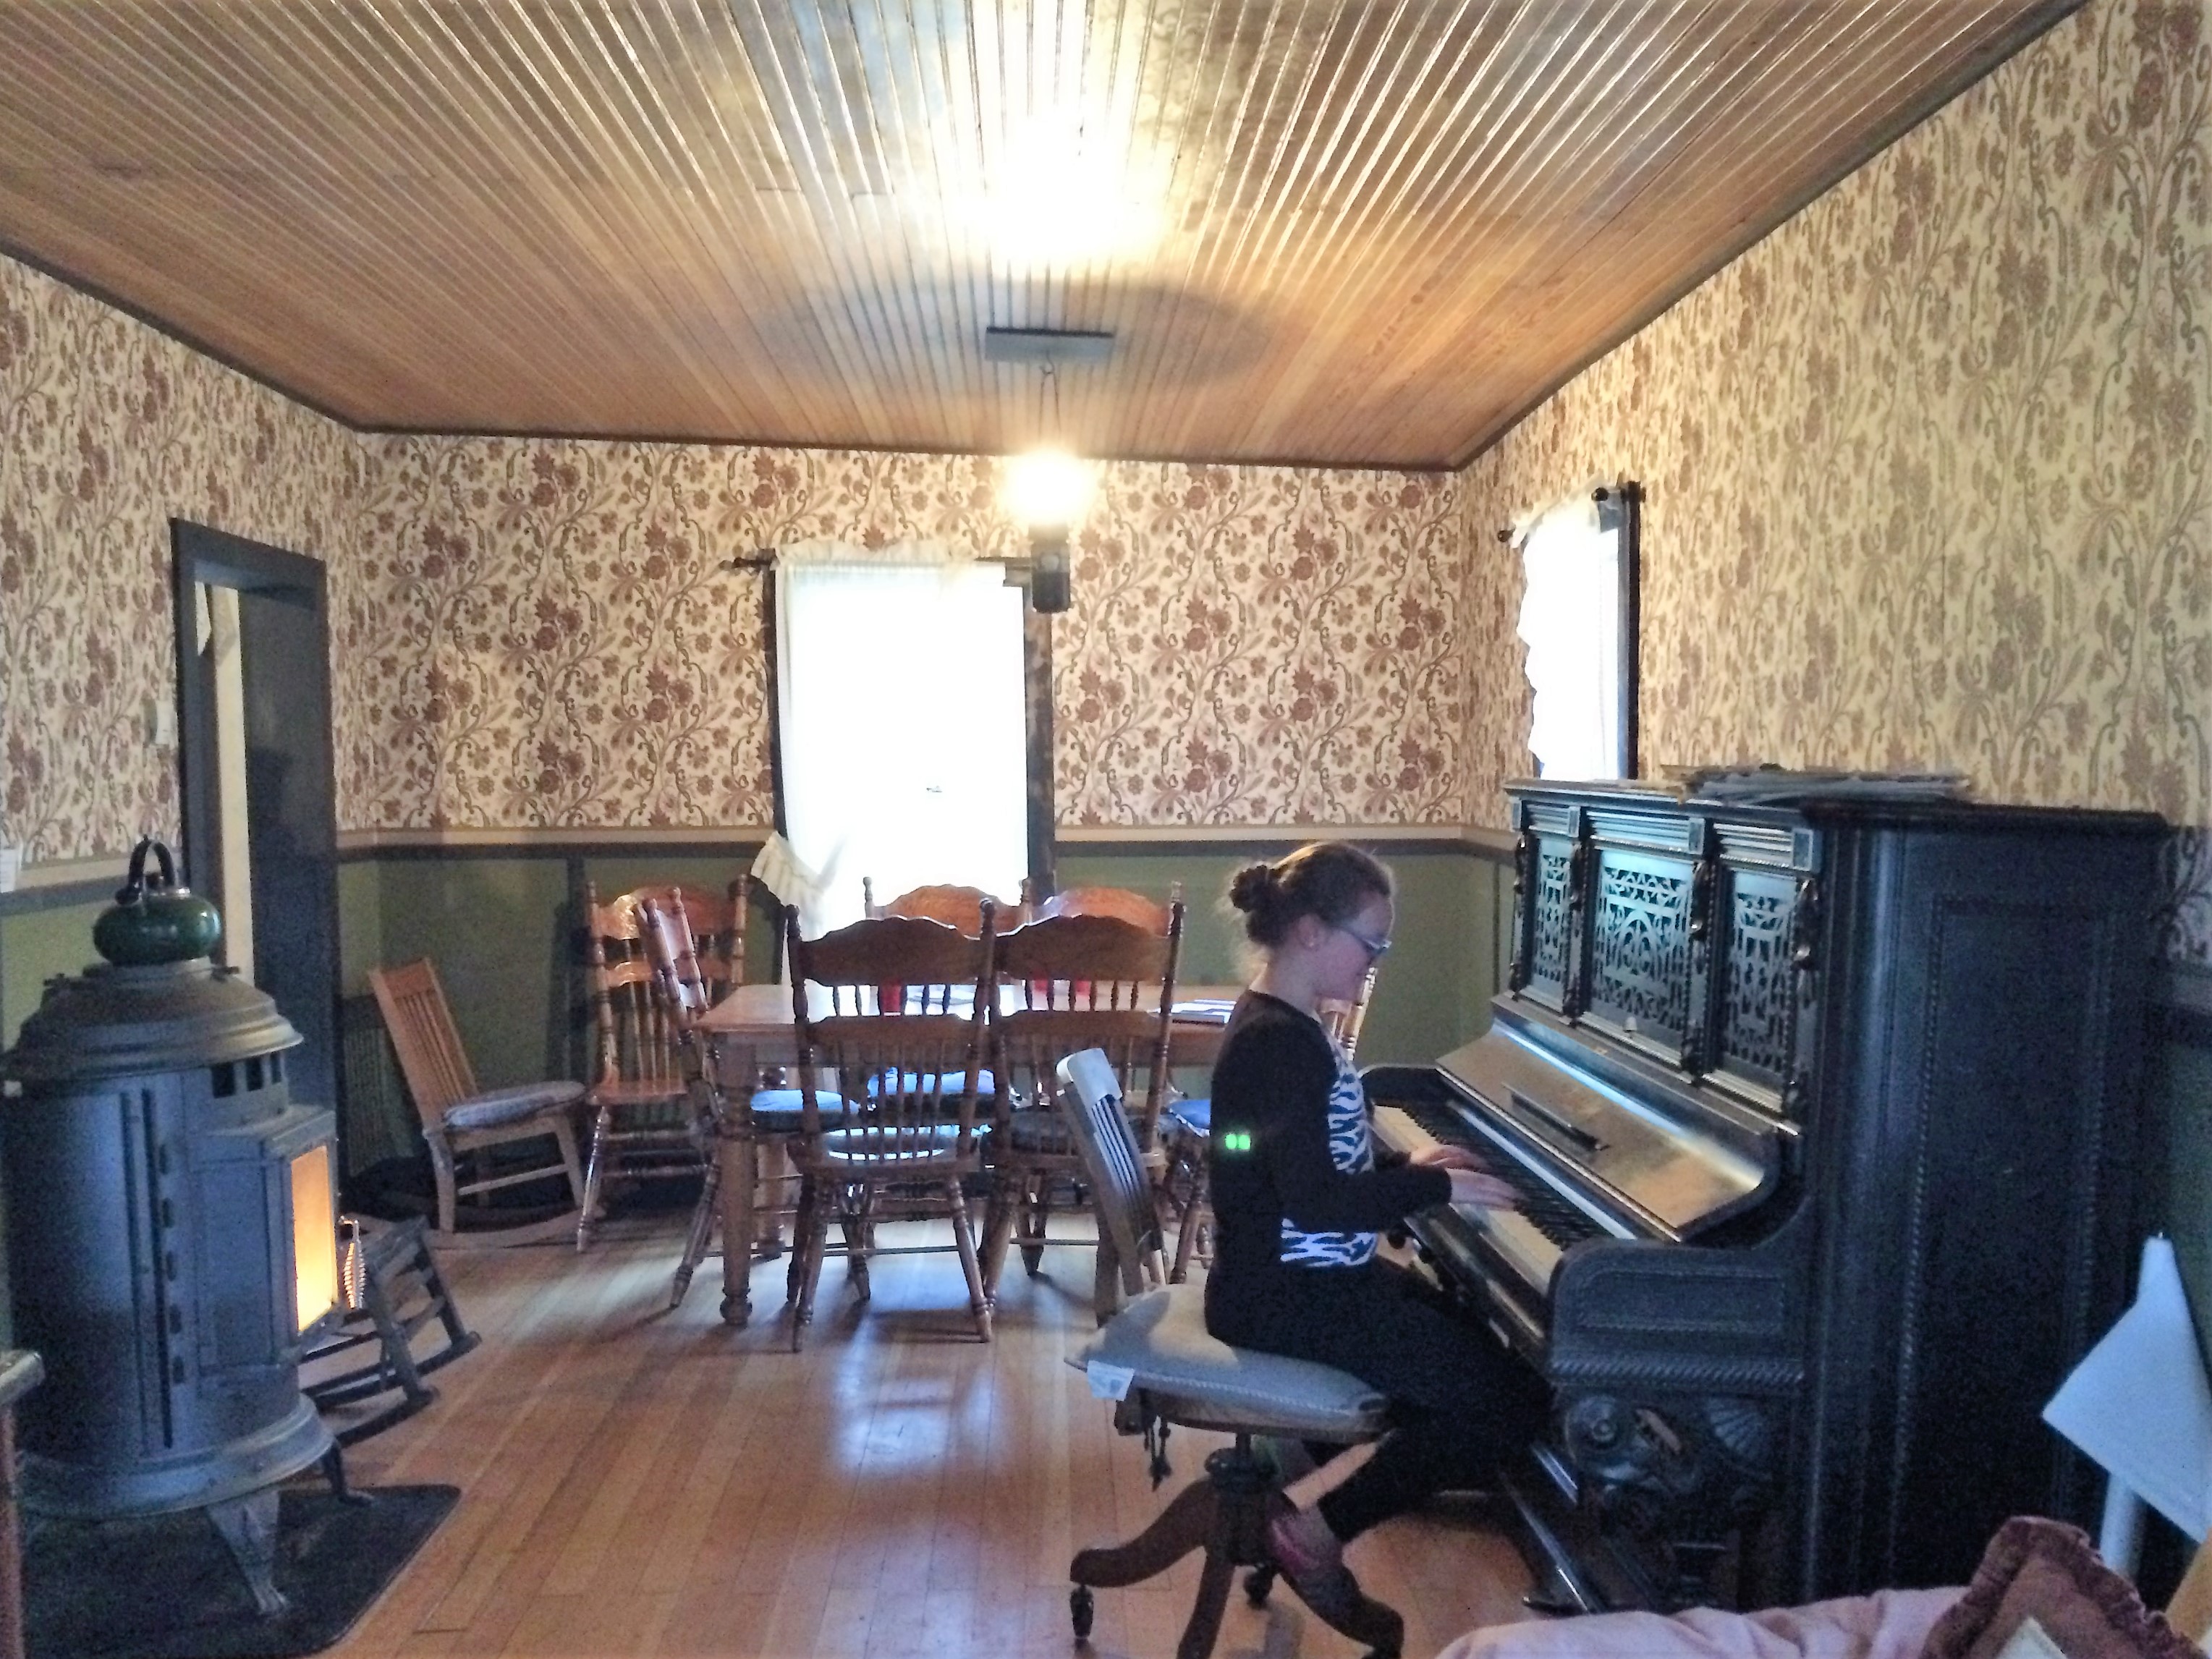 A rustic living room and dining room with wood floors, an old-fashioned warming stove, piano, and opulent wallpaper.